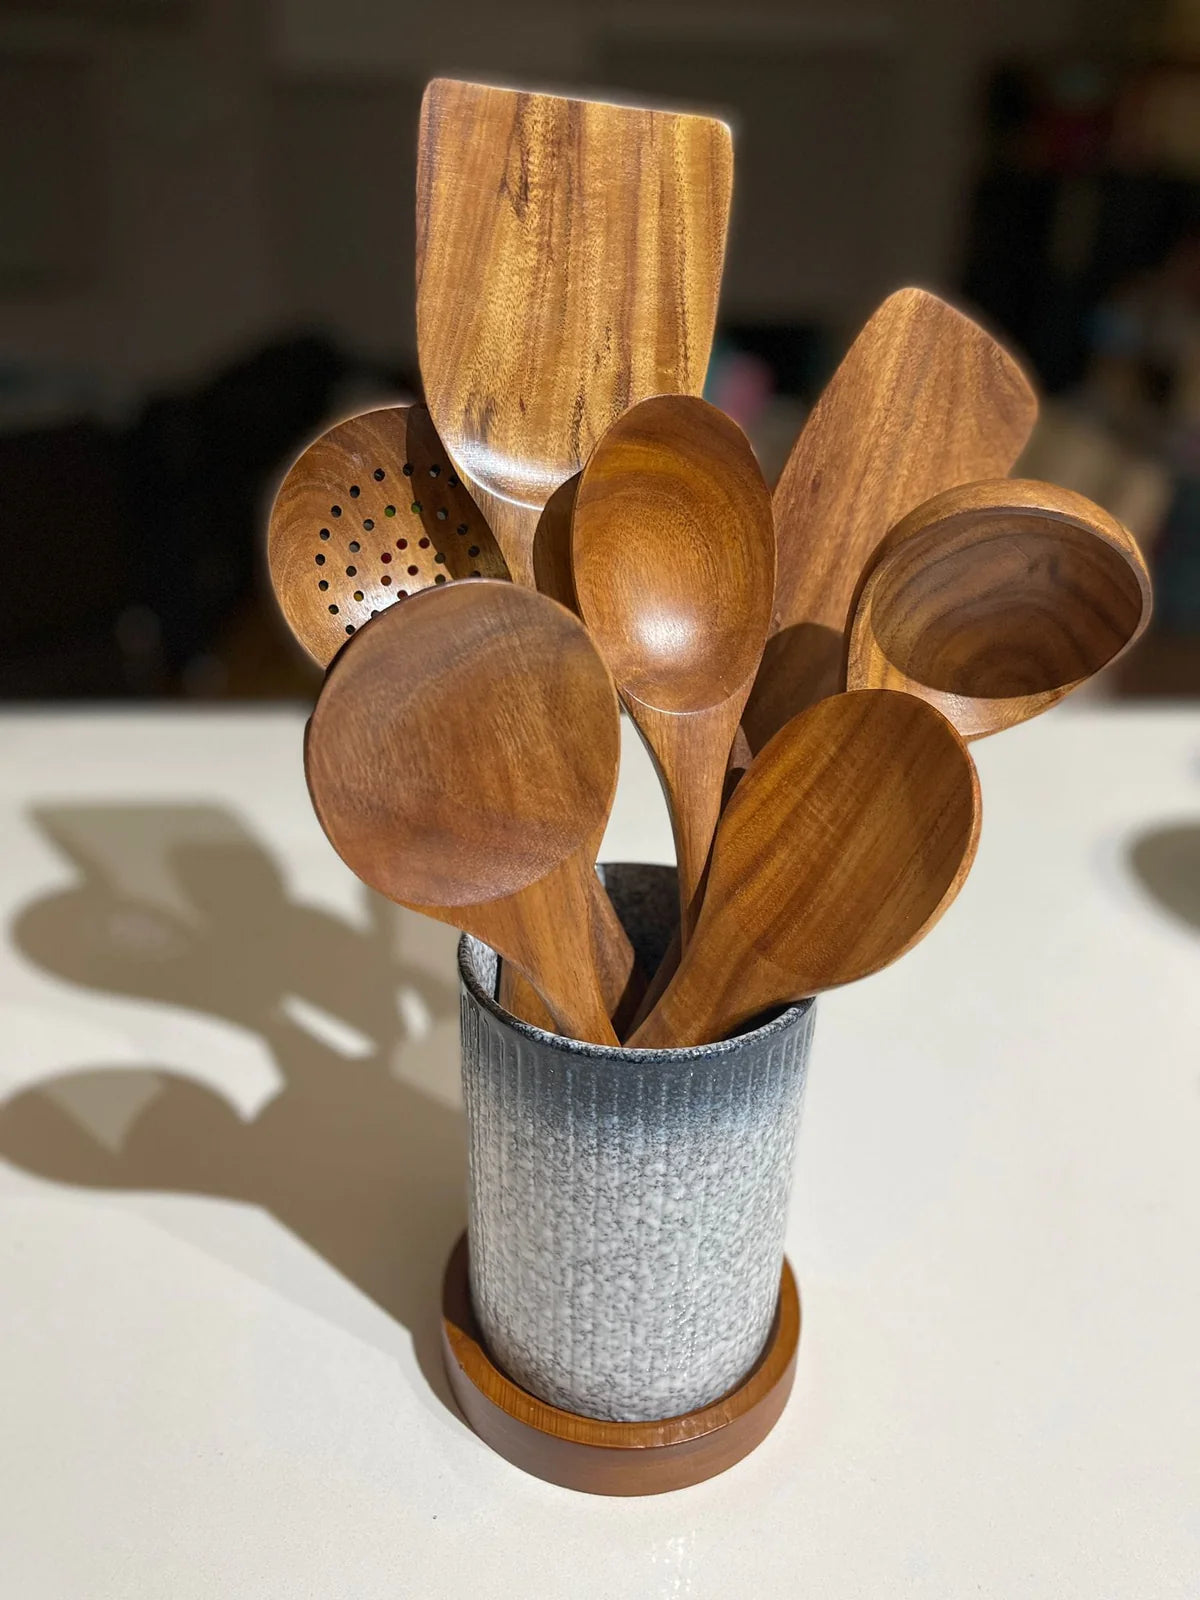 Wooden Utensils Holder: The Perfect Way to Keep Your Kitchen Organized